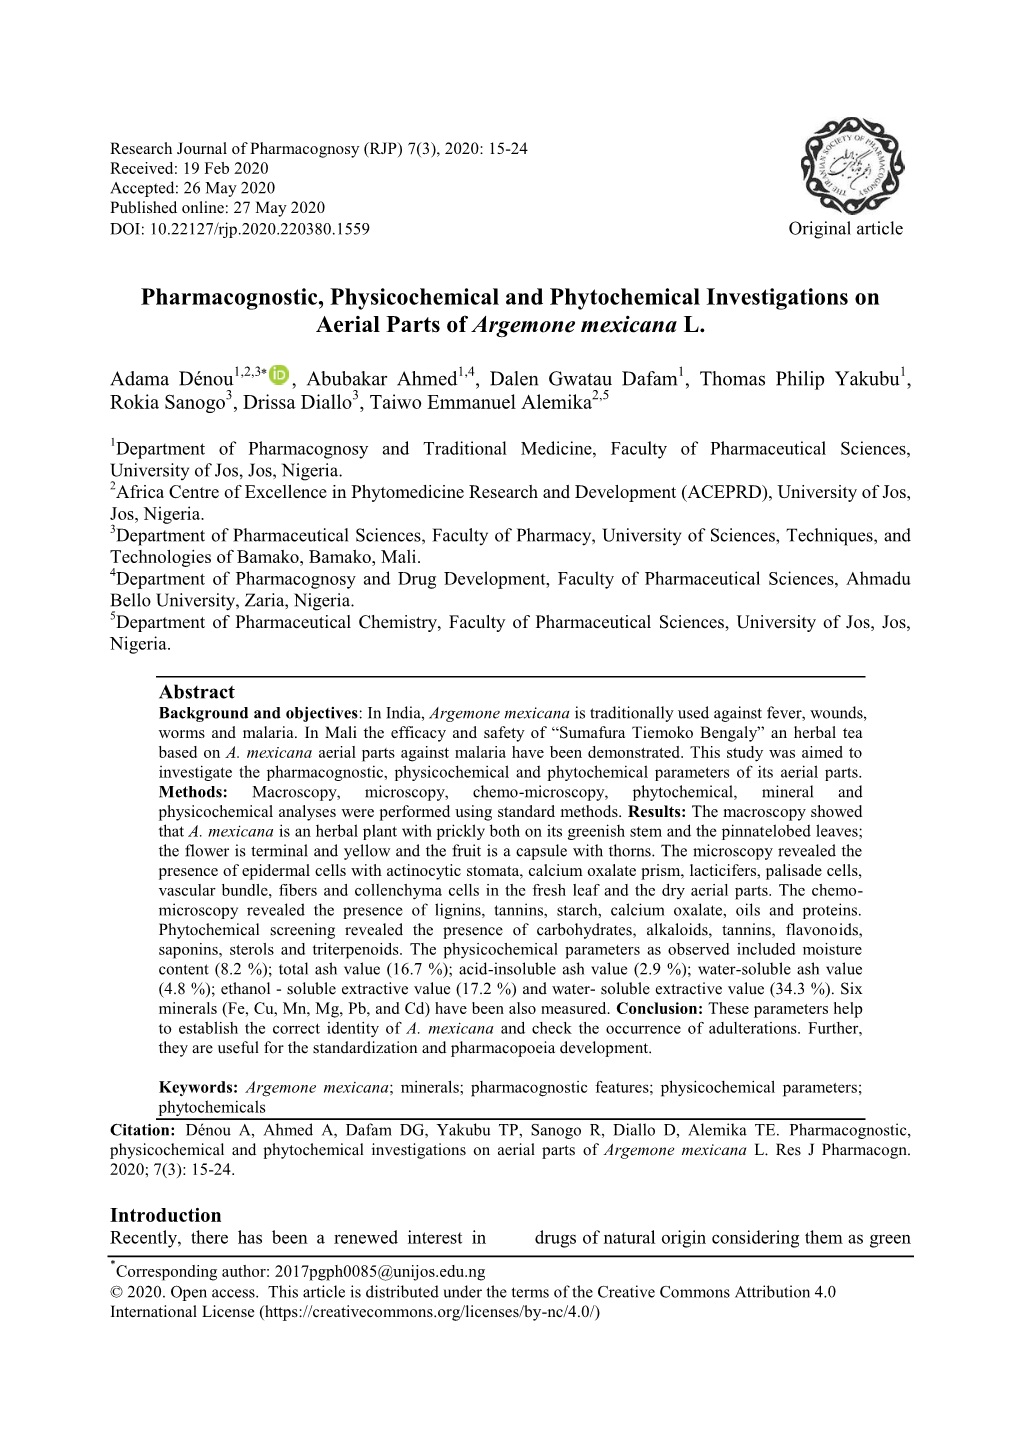 Pharmacognostic, Physicochemical and Phytochemical Investigations on Aerial Parts of Argemone Mexicana L